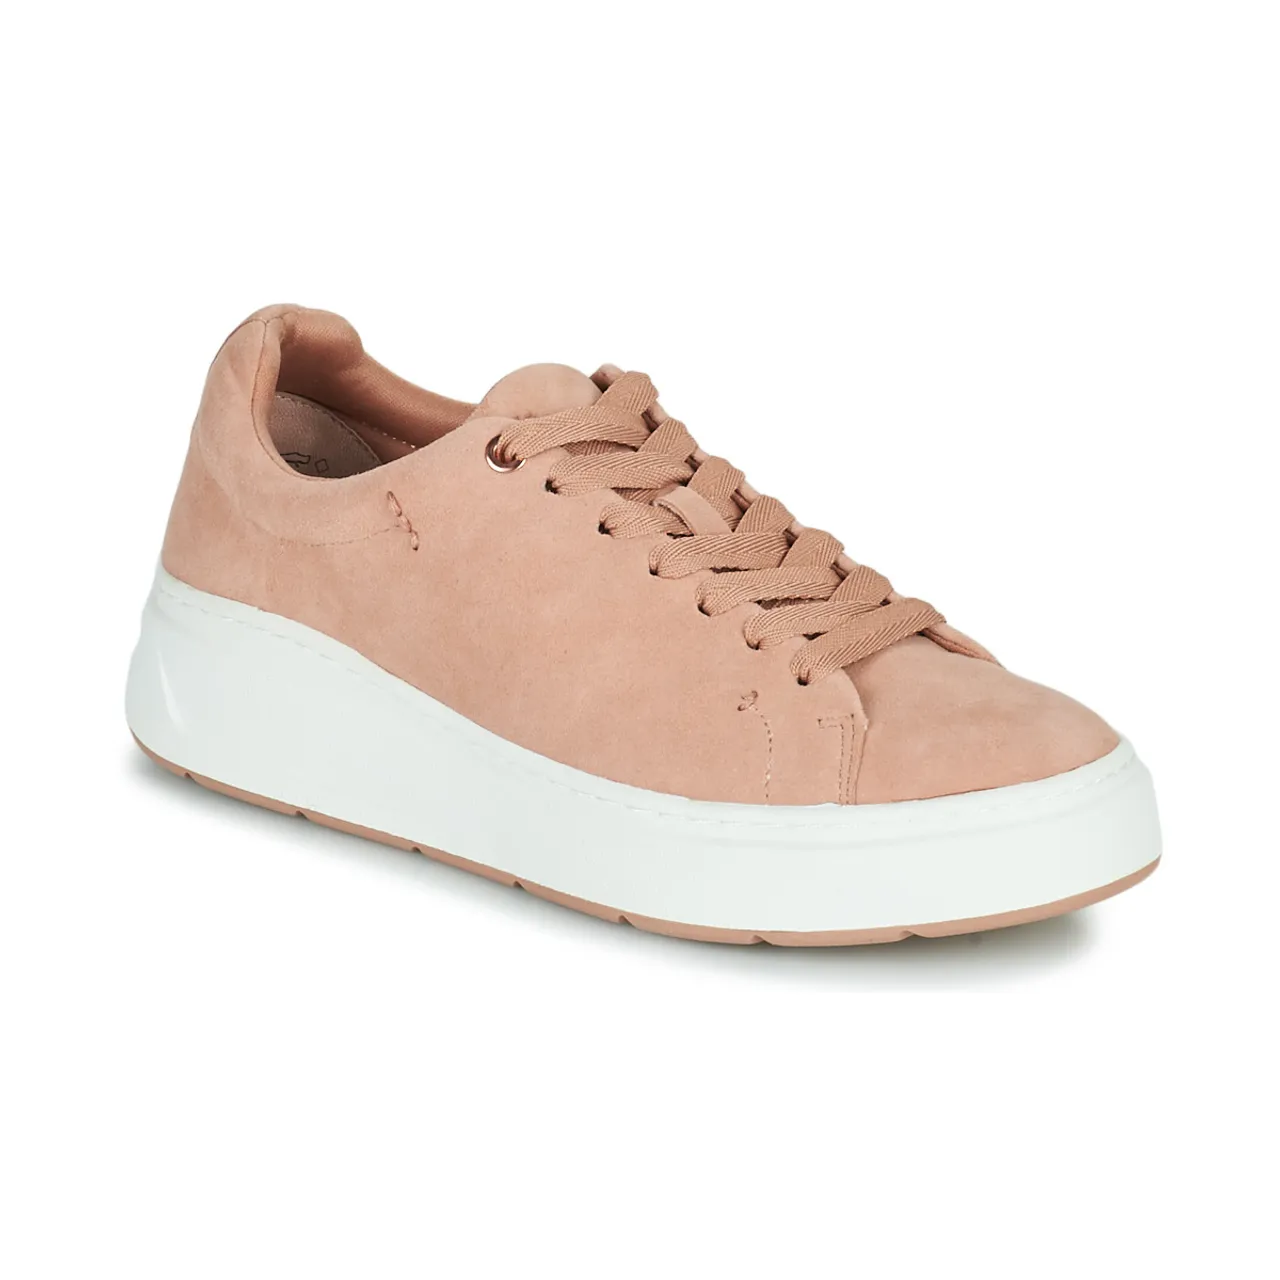 Tamaris  -  women's Shoes (Trainers) in Pink